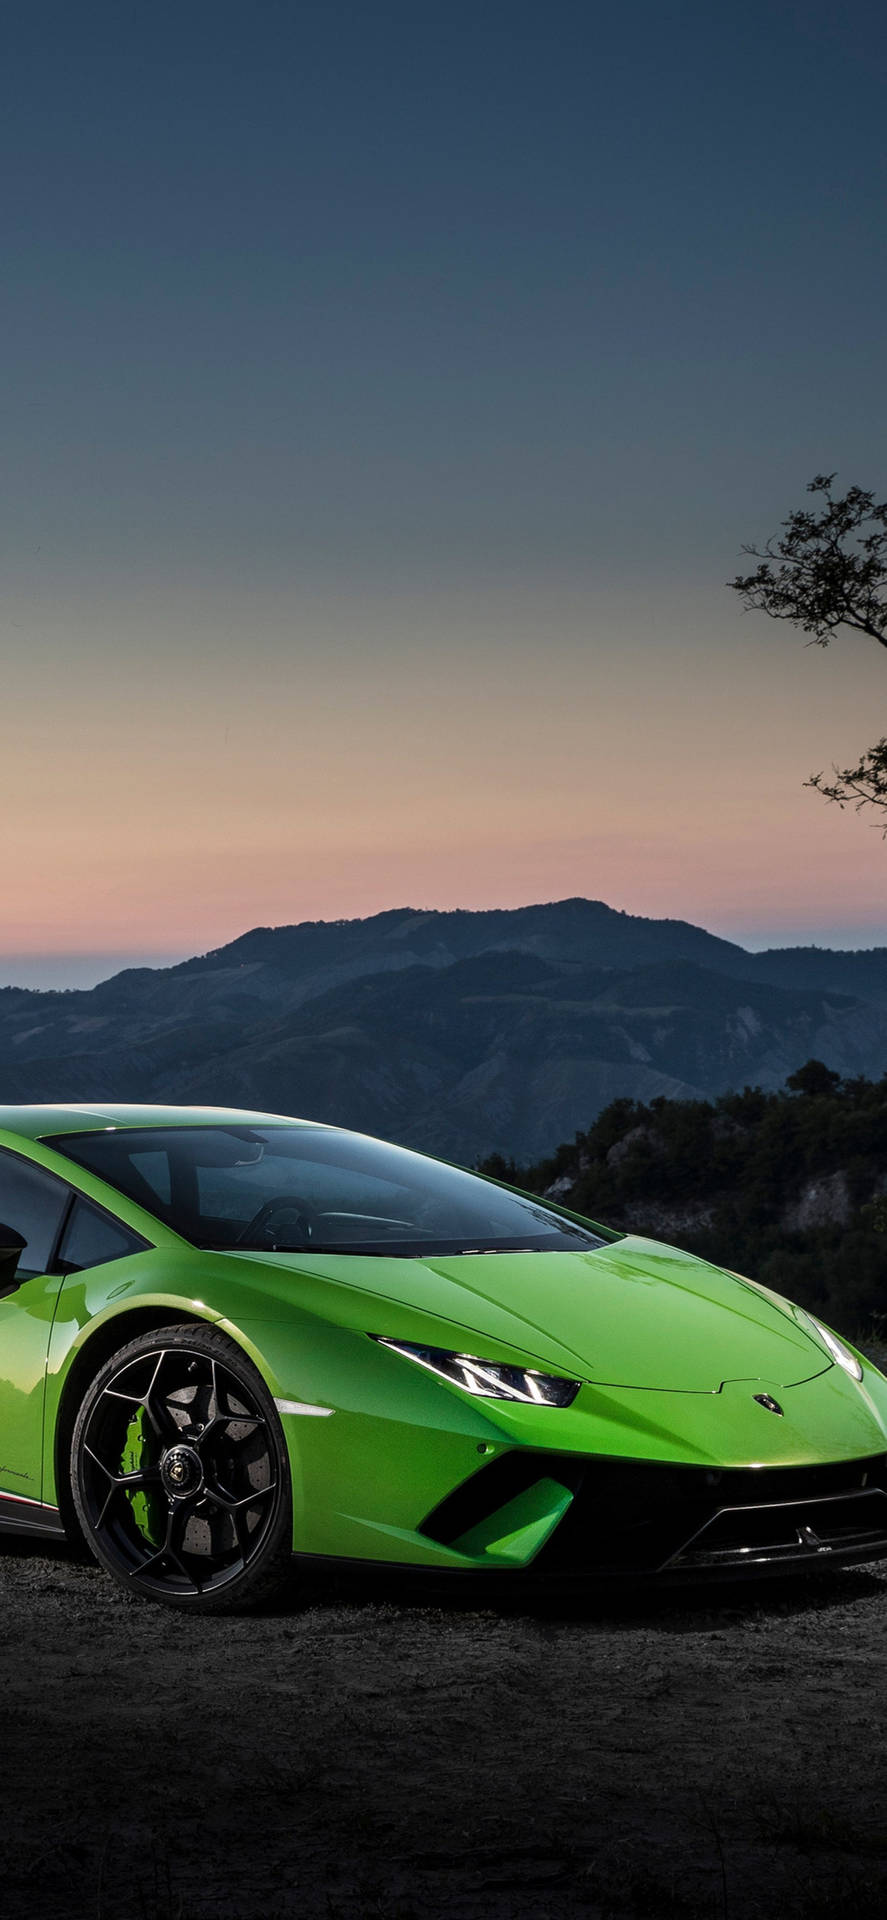 Experience the luxury of a Lamborghini with the power of an iPhone! Wallpaper